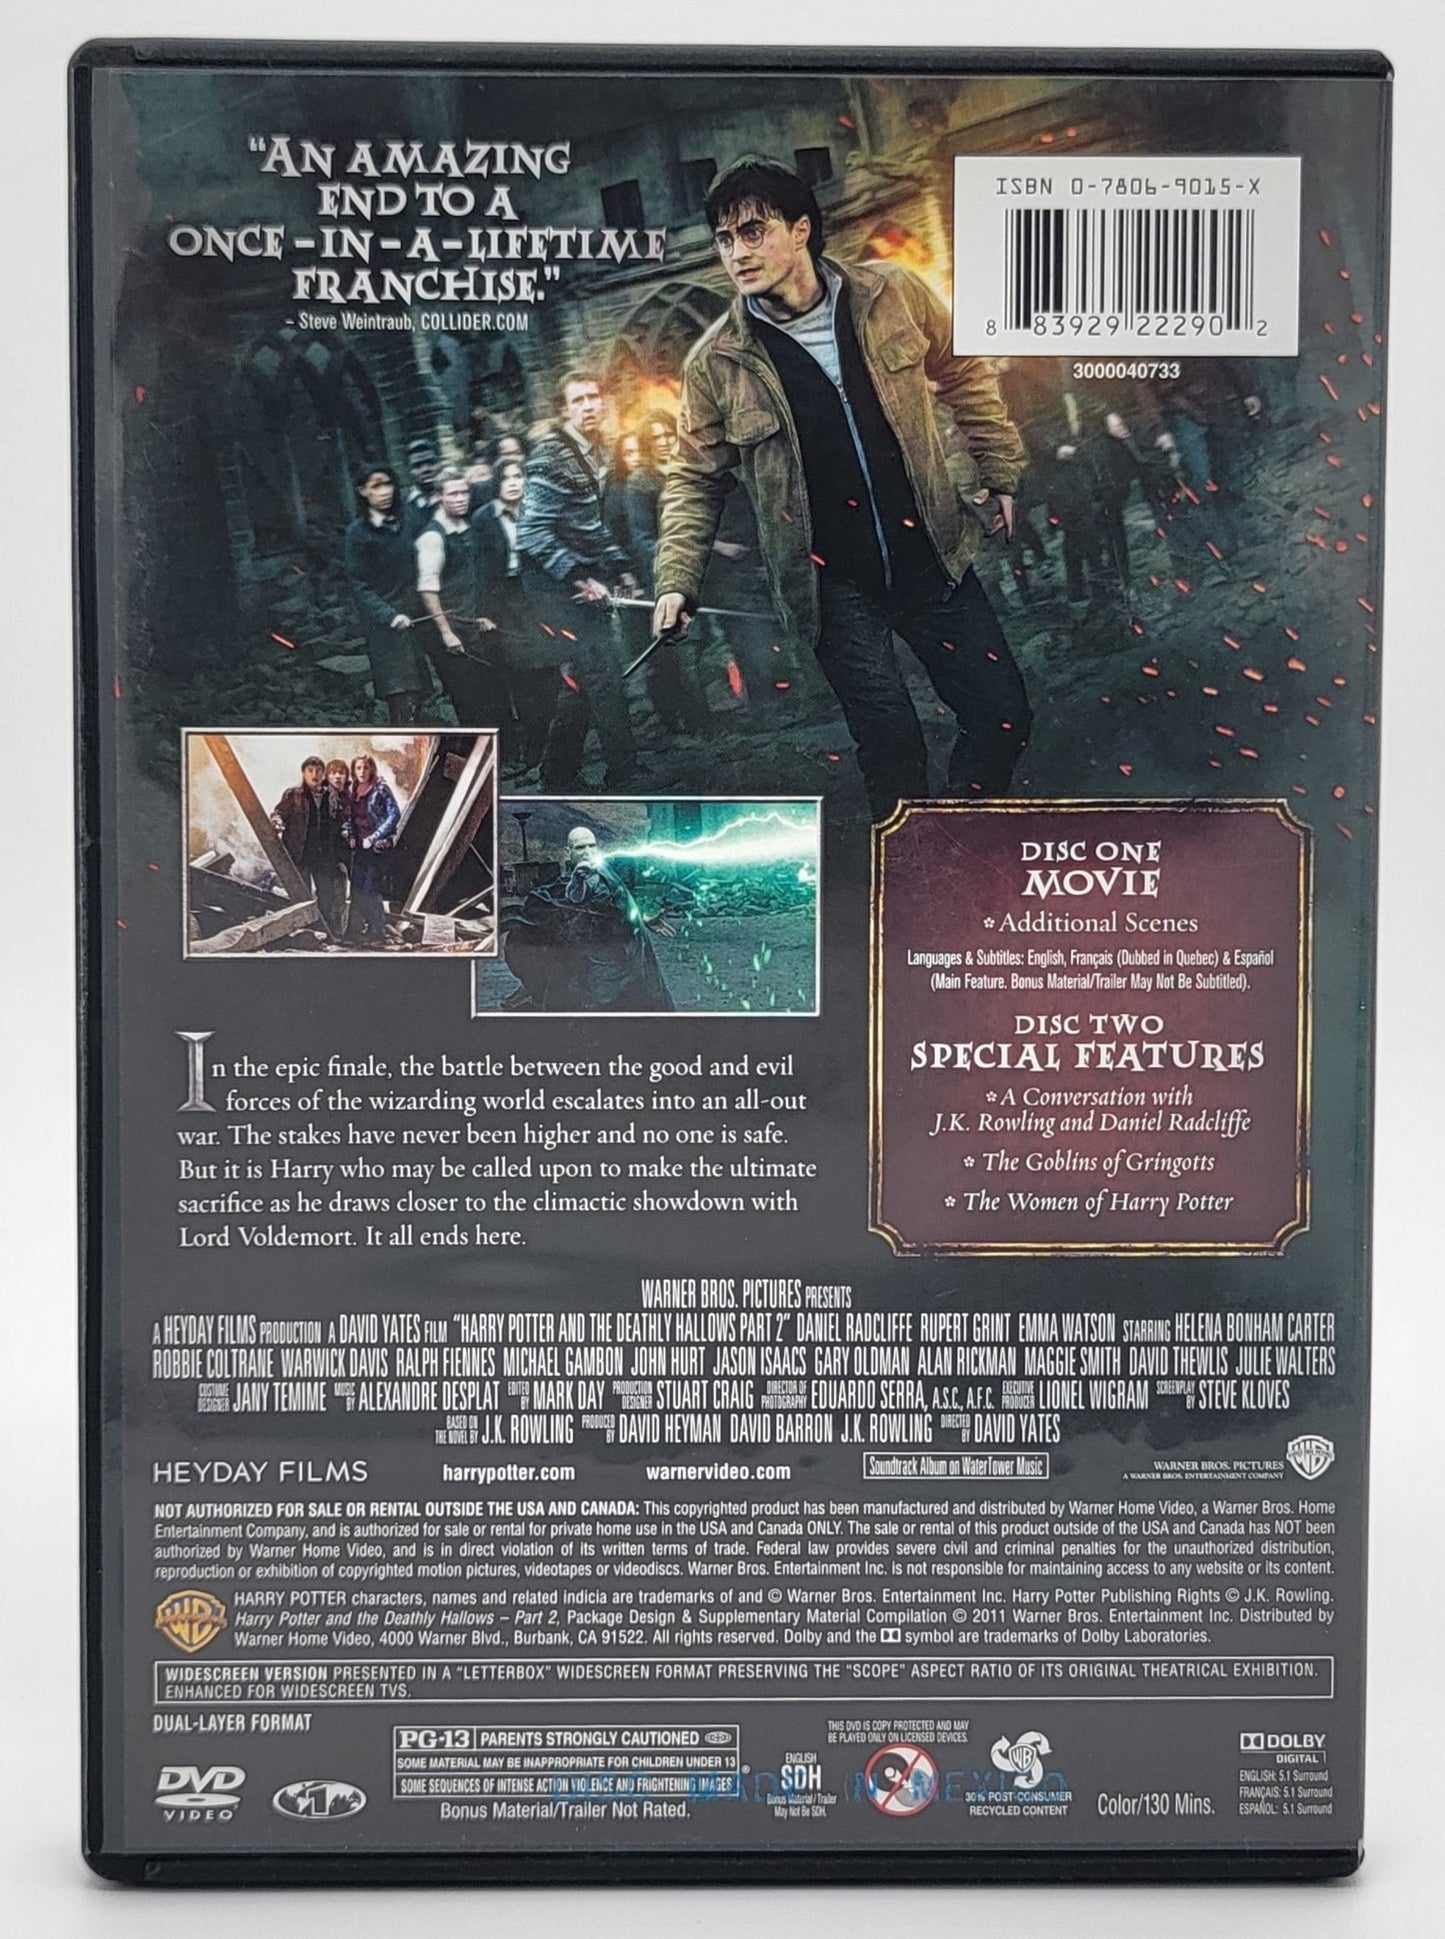 Warner Brothers - Harry Potter and the Deathly Hallows Part 2 | DVD | 2 disc Special Edition - DVD - Steady Bunny Shop